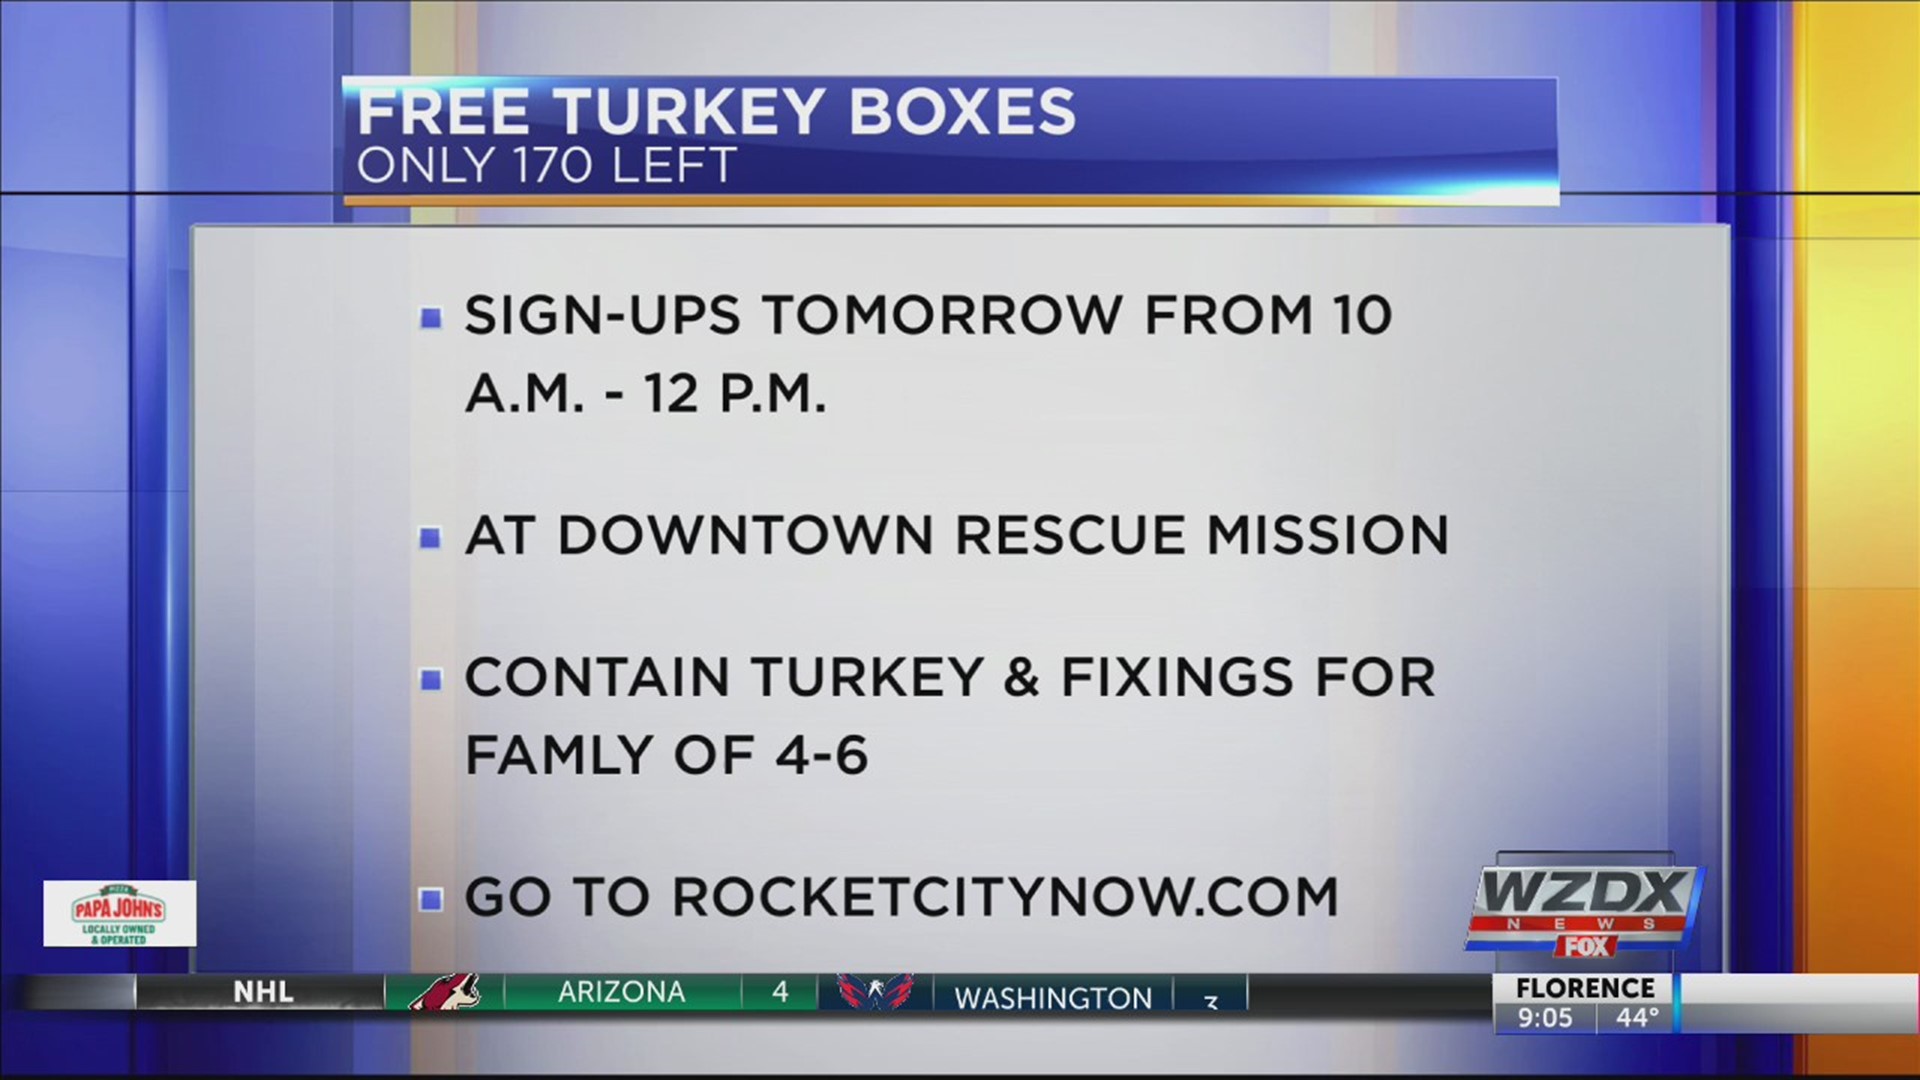 While there's still time to reserve your turkey box for Thanksgiving, the Downtown Rescue Mission says they only have 170 turkey boxes left, due to the amount of people signing up Monday, Nov. 11. The remaining boxes will be reserved for people on a first-come, first-served basis.